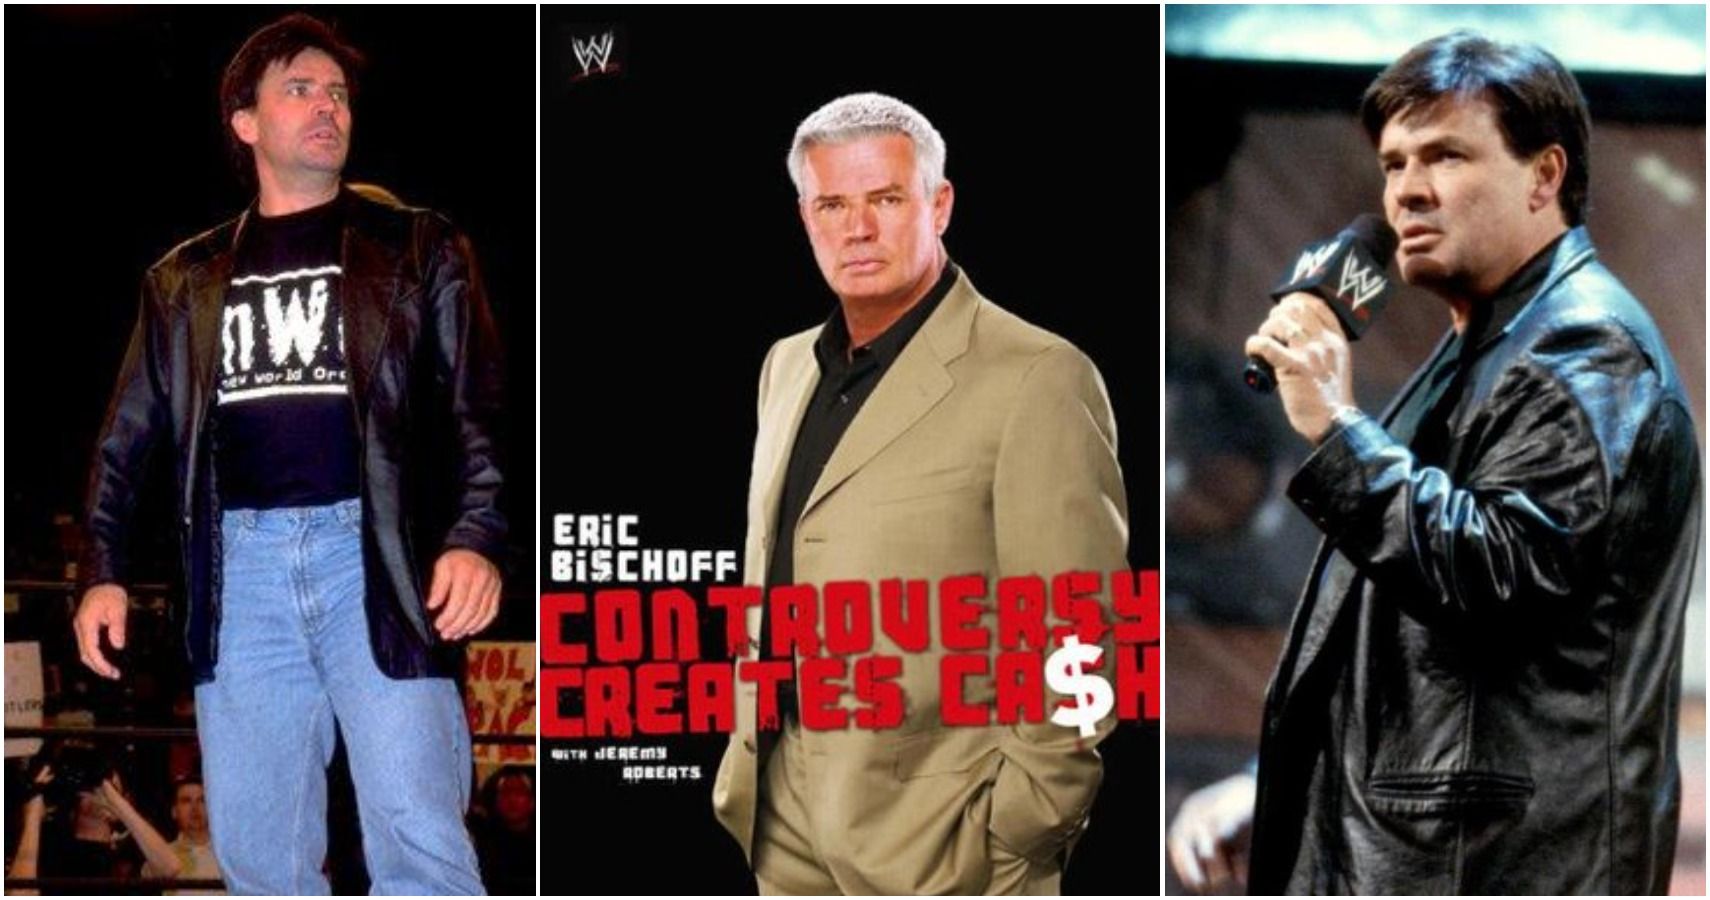 Eric Bischoff On WCW, WWE And His Book Cover